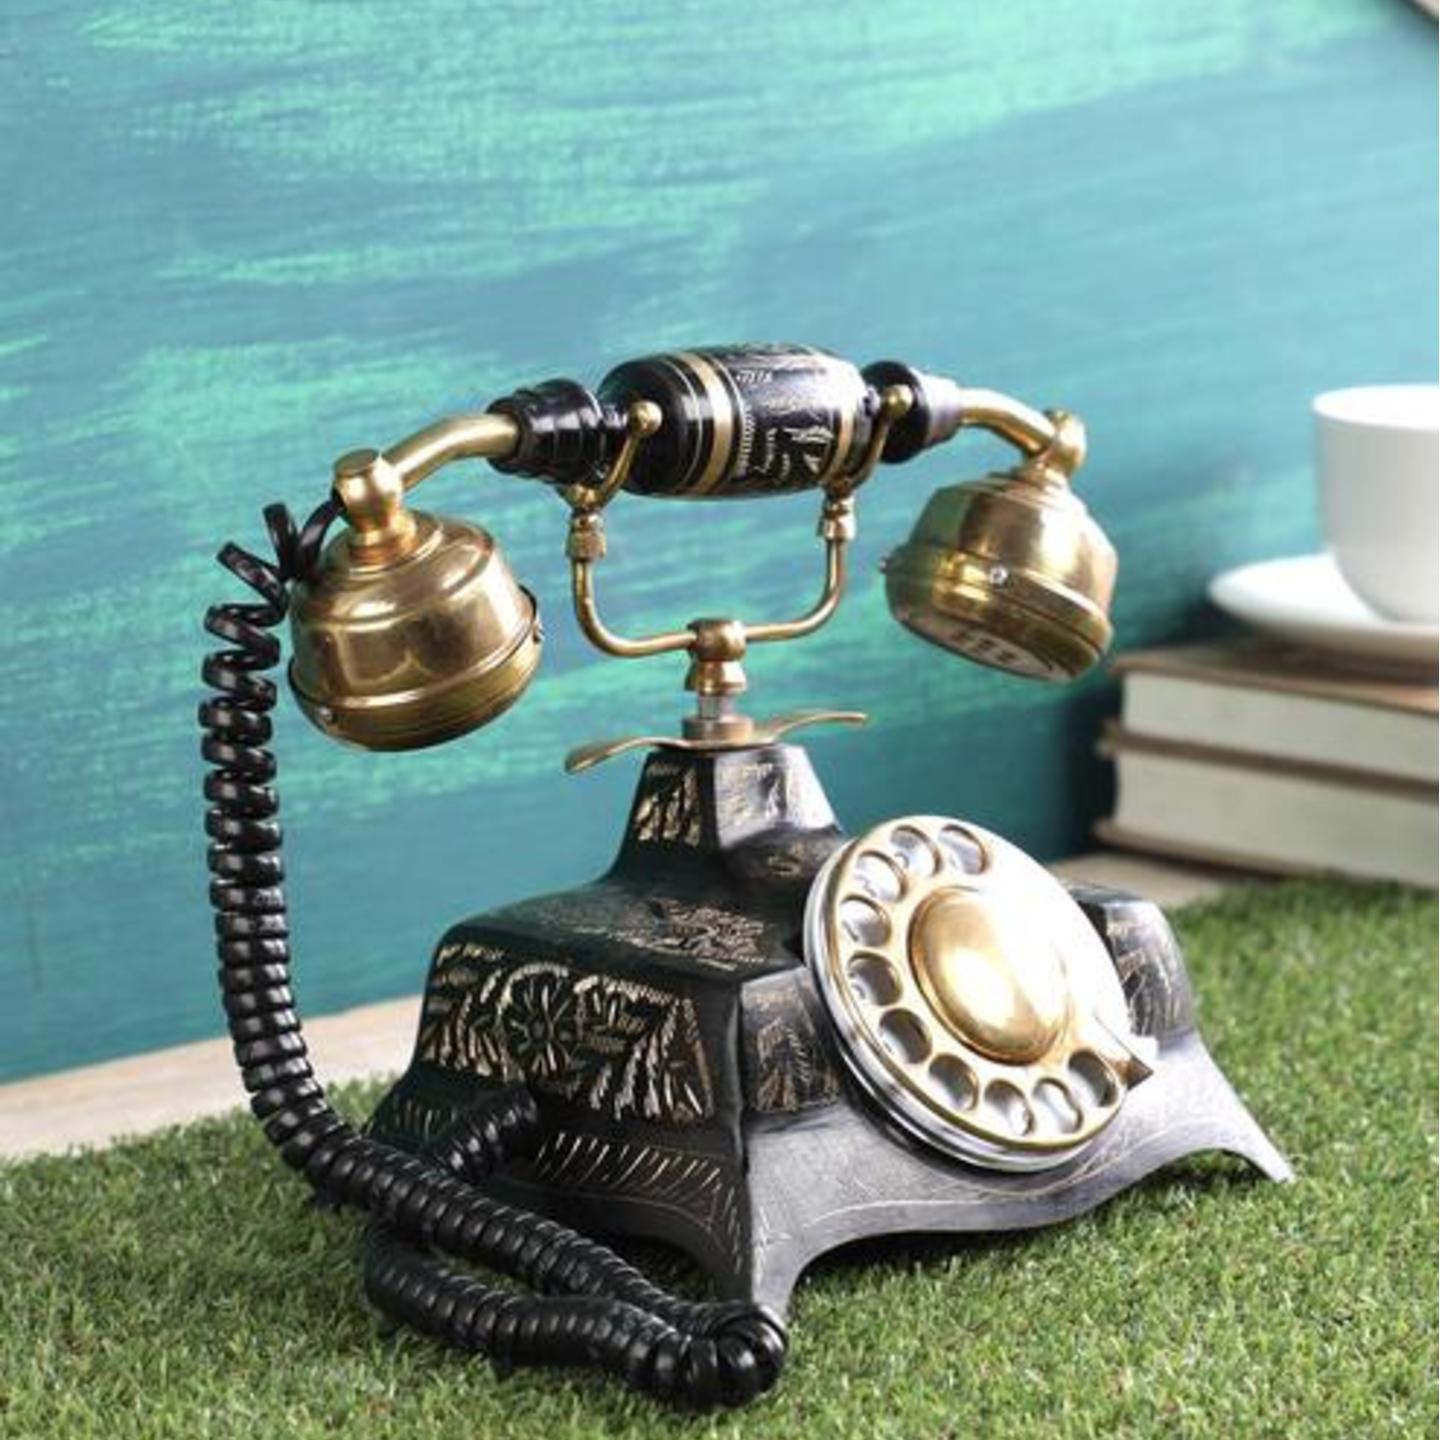 Retro, Vintage, Rotary, Old Time, Antique working Telephone in Brass